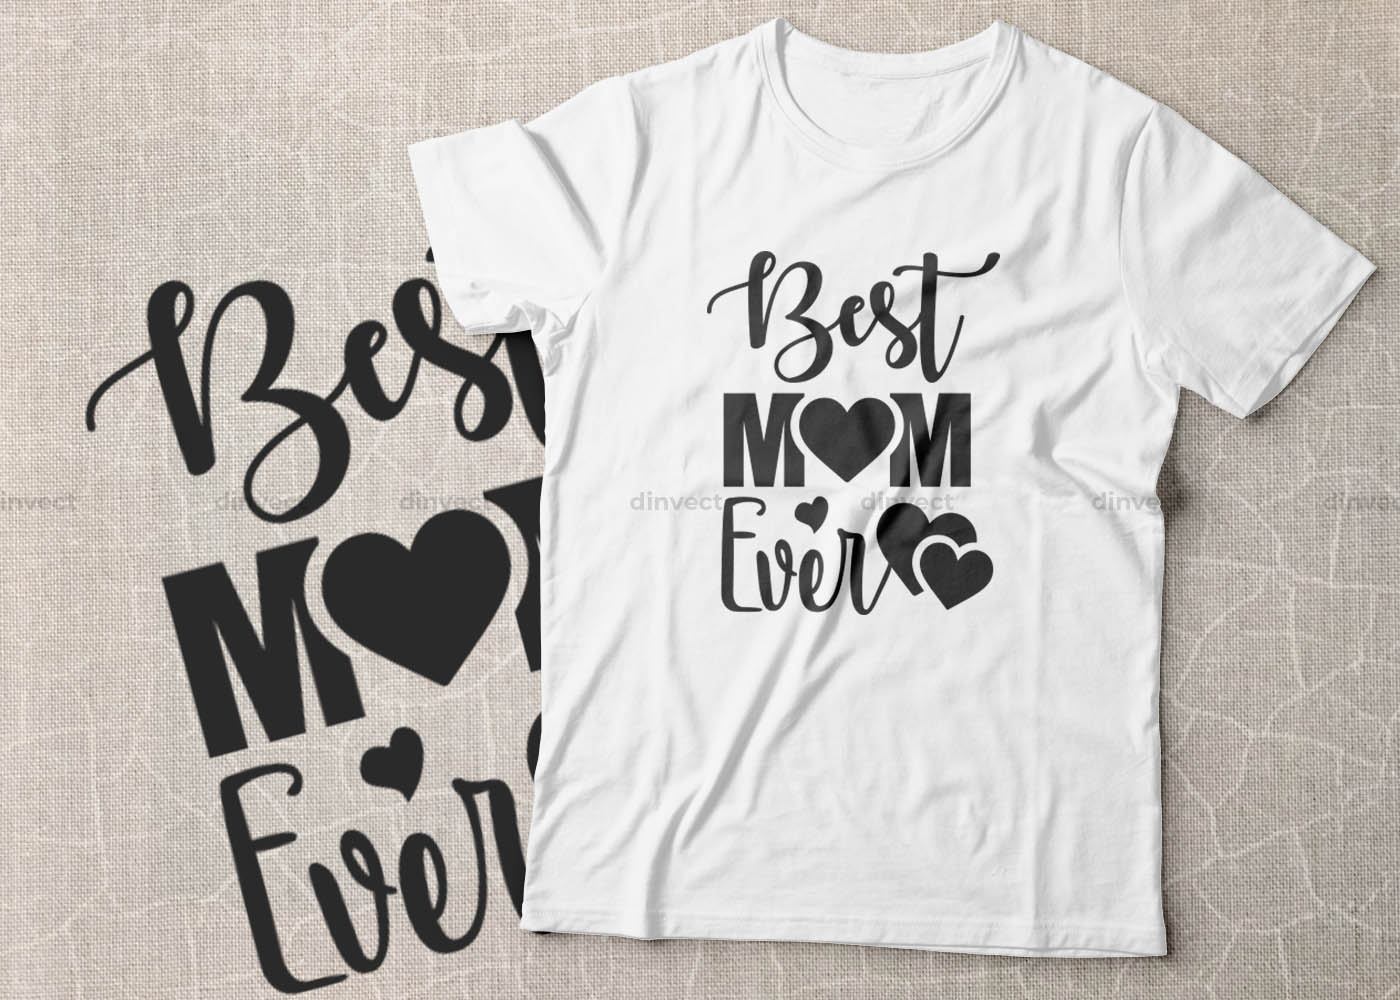 Download Best Mom Ever Svg Mom Svg Mothers Day T Shirt Design Happy Mothers Day Svg Mother S Day Cricut Files Mom Gift Cameo Vinyl Designs Iron On Decals Cricut Cut Files Svg Eps Dxf